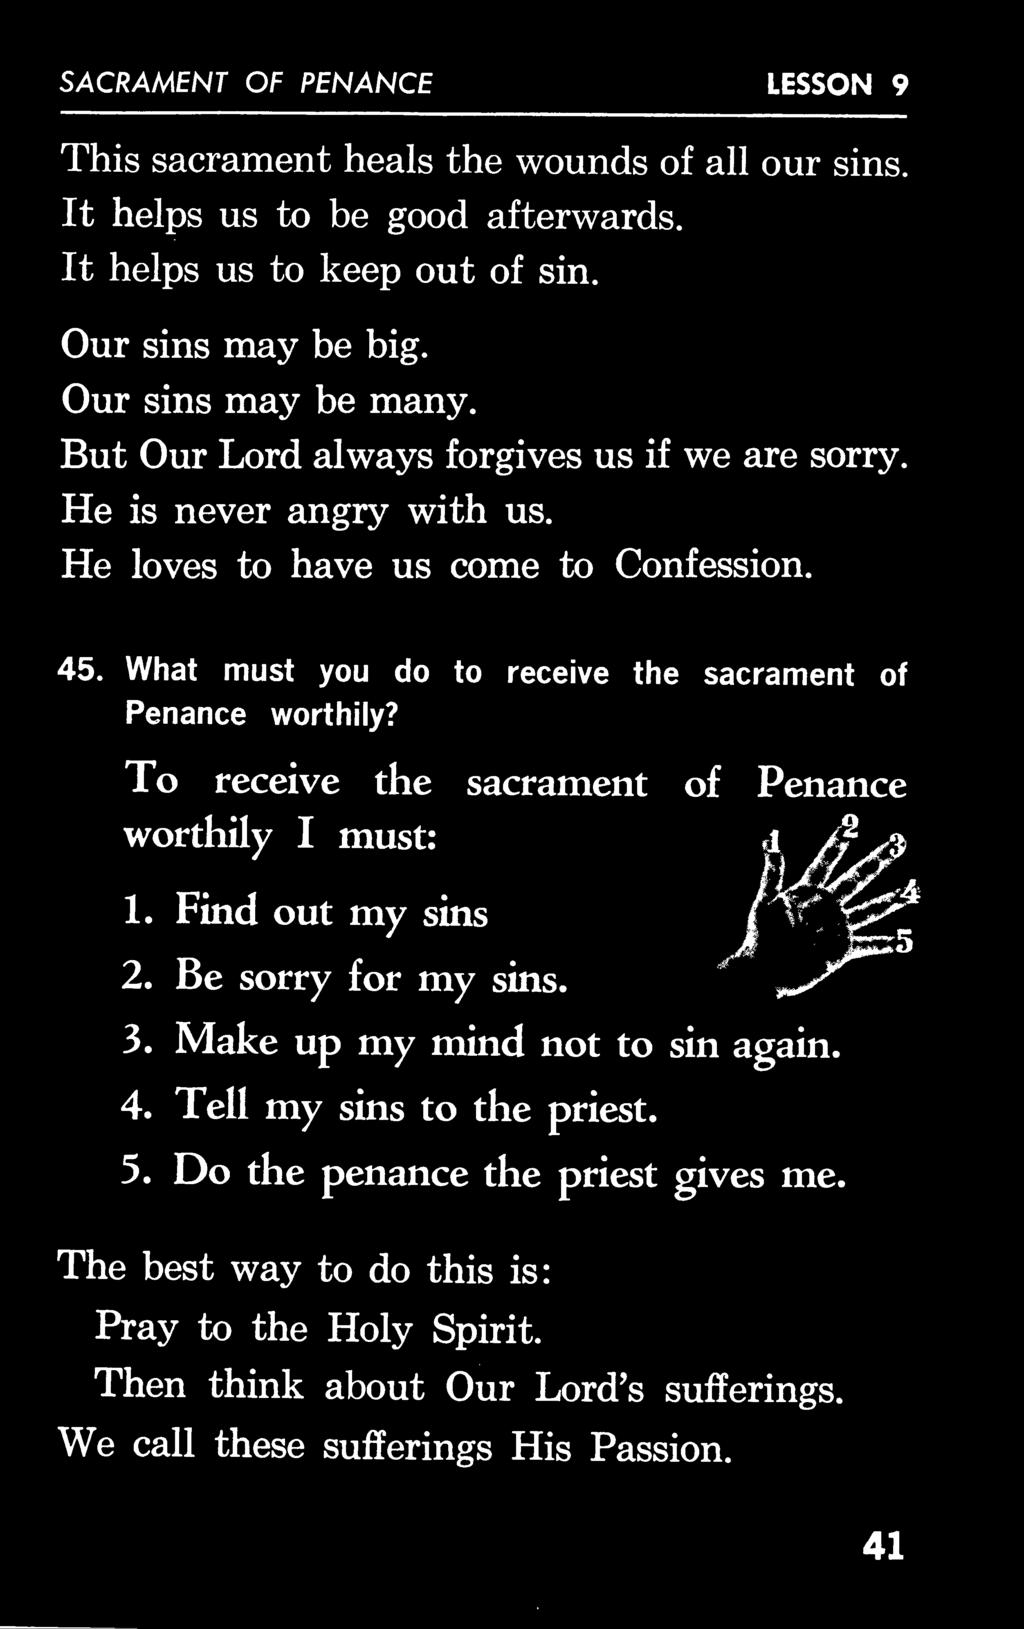 SACRAMENT OF PENANCE LESSON 9 This sacrament heals the wounds of all our sins. It helps us to be good afterwards. It helps us to keep out of sin. Our sins may be big. Our sins may be many.